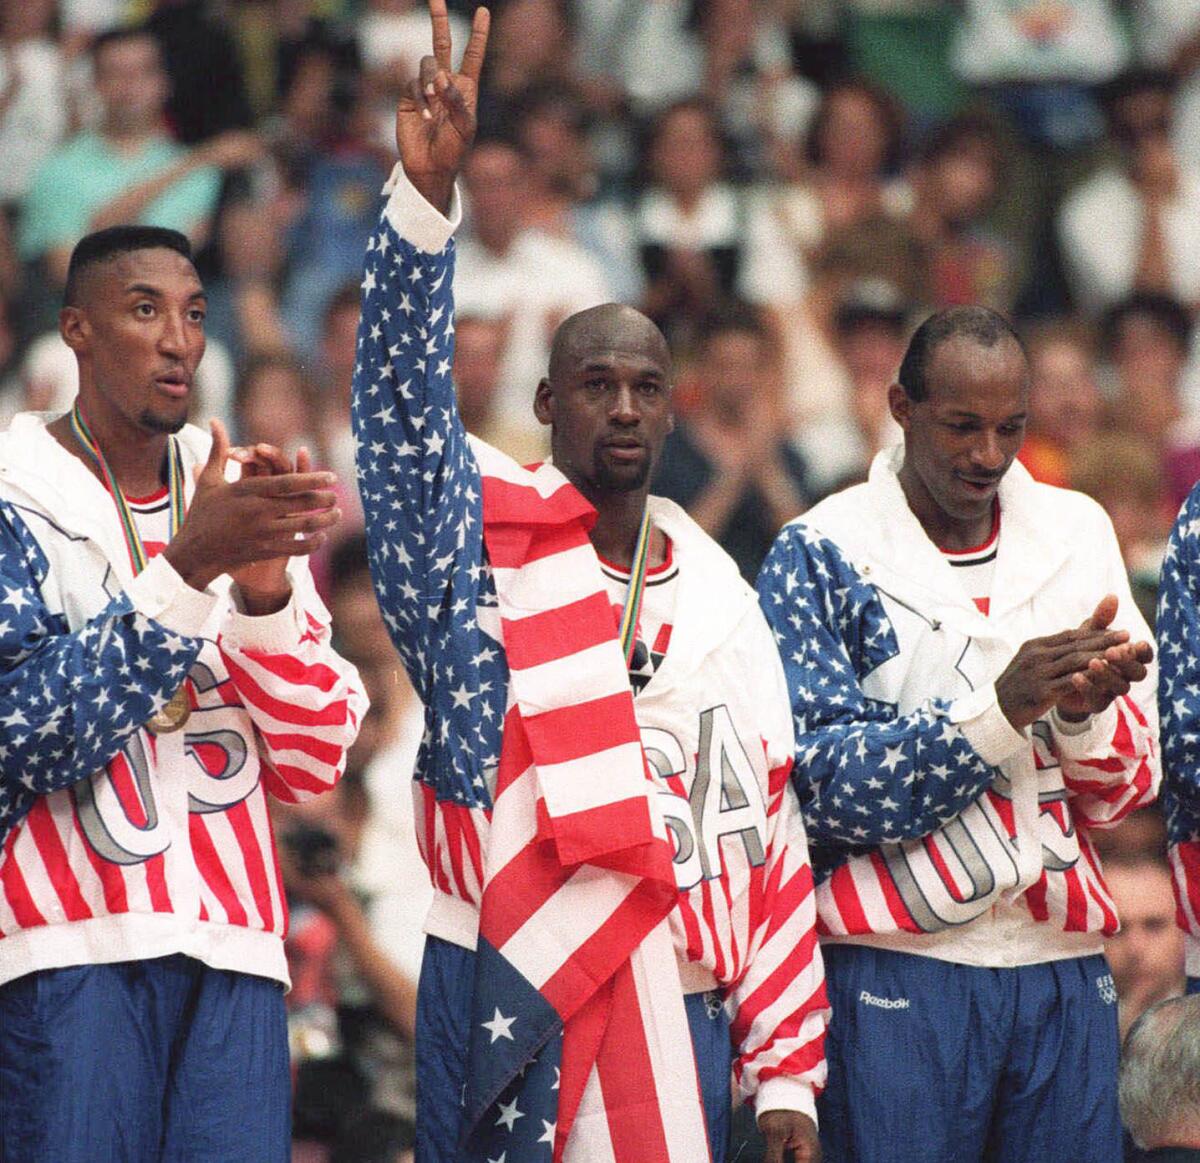 The United States' Michael Jordan, center, poses Aug. 8, 1992, with his gold medal during the Barcelona Olympics with a flag dropped over his shoulder to hide a rival sponsor's logo on his jacket.